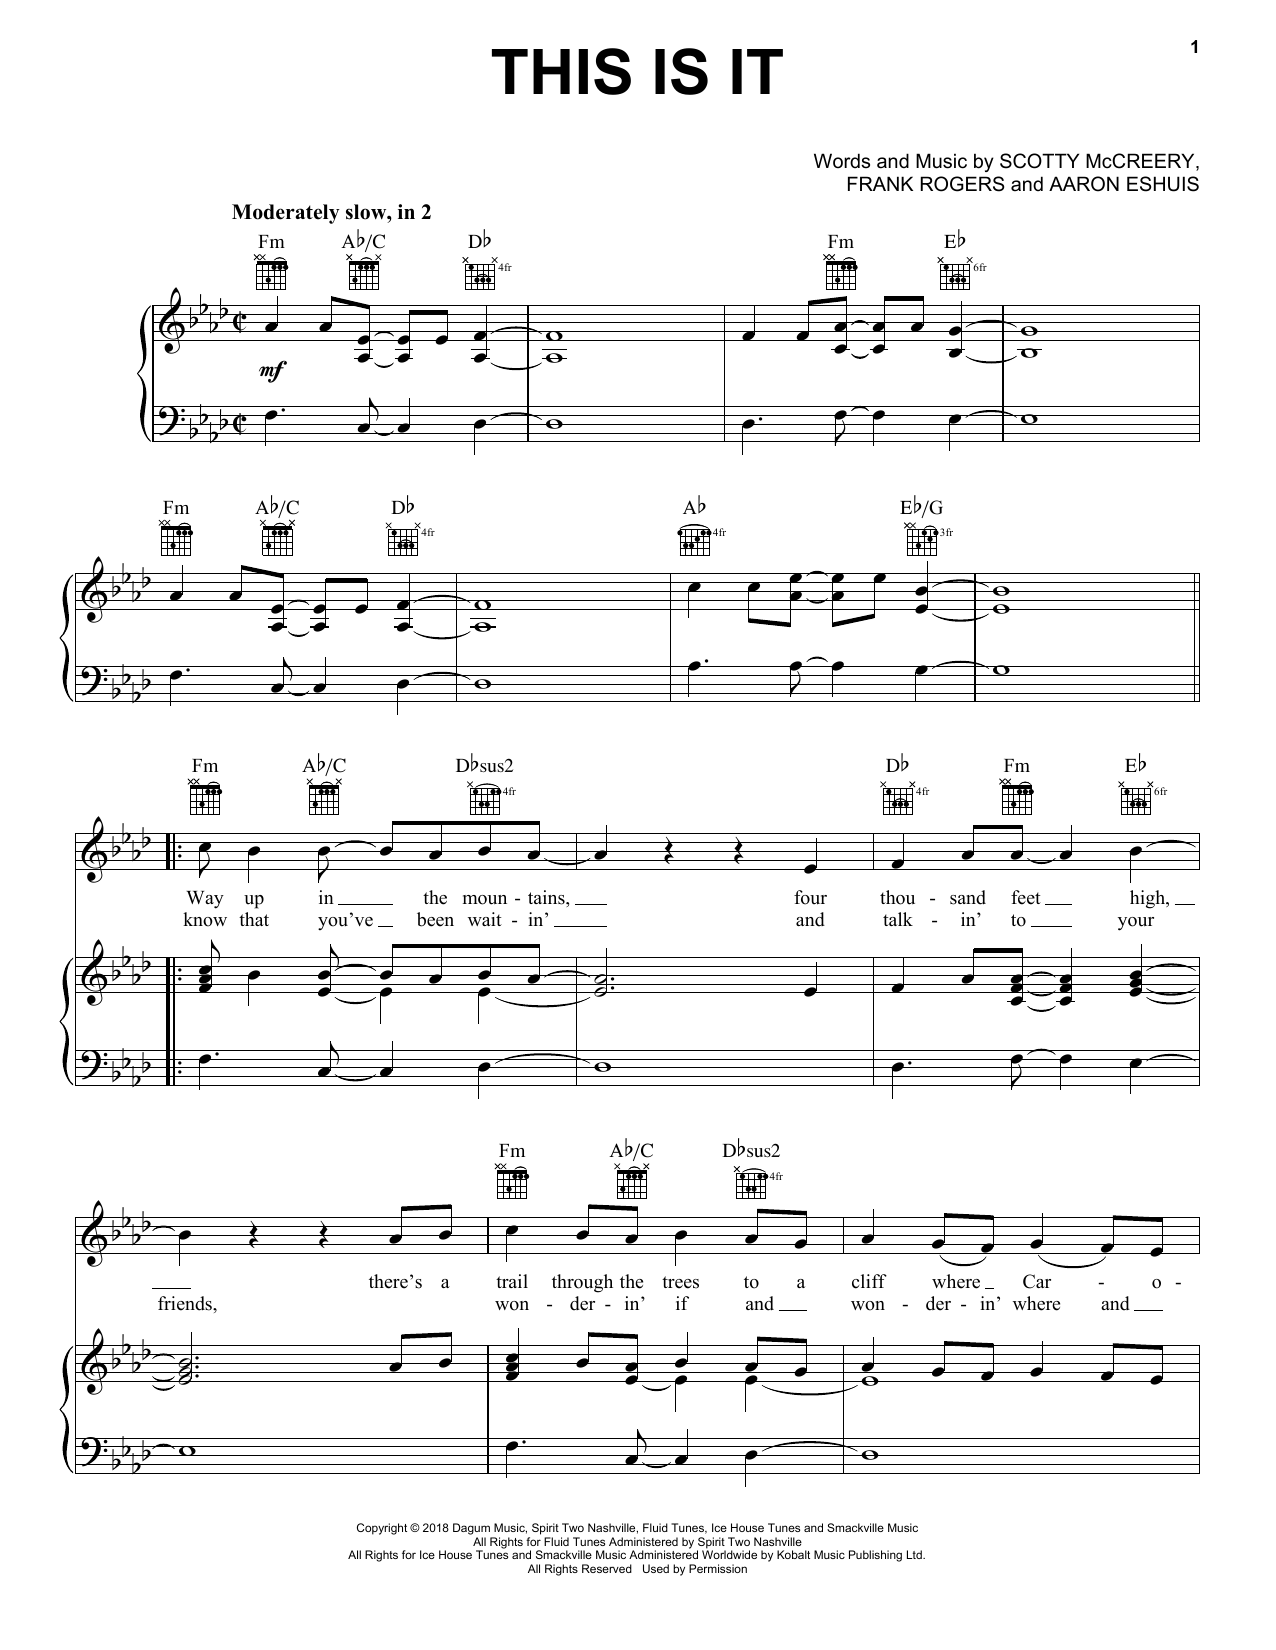 Download Scotty McCreery This Is It Sheet Music